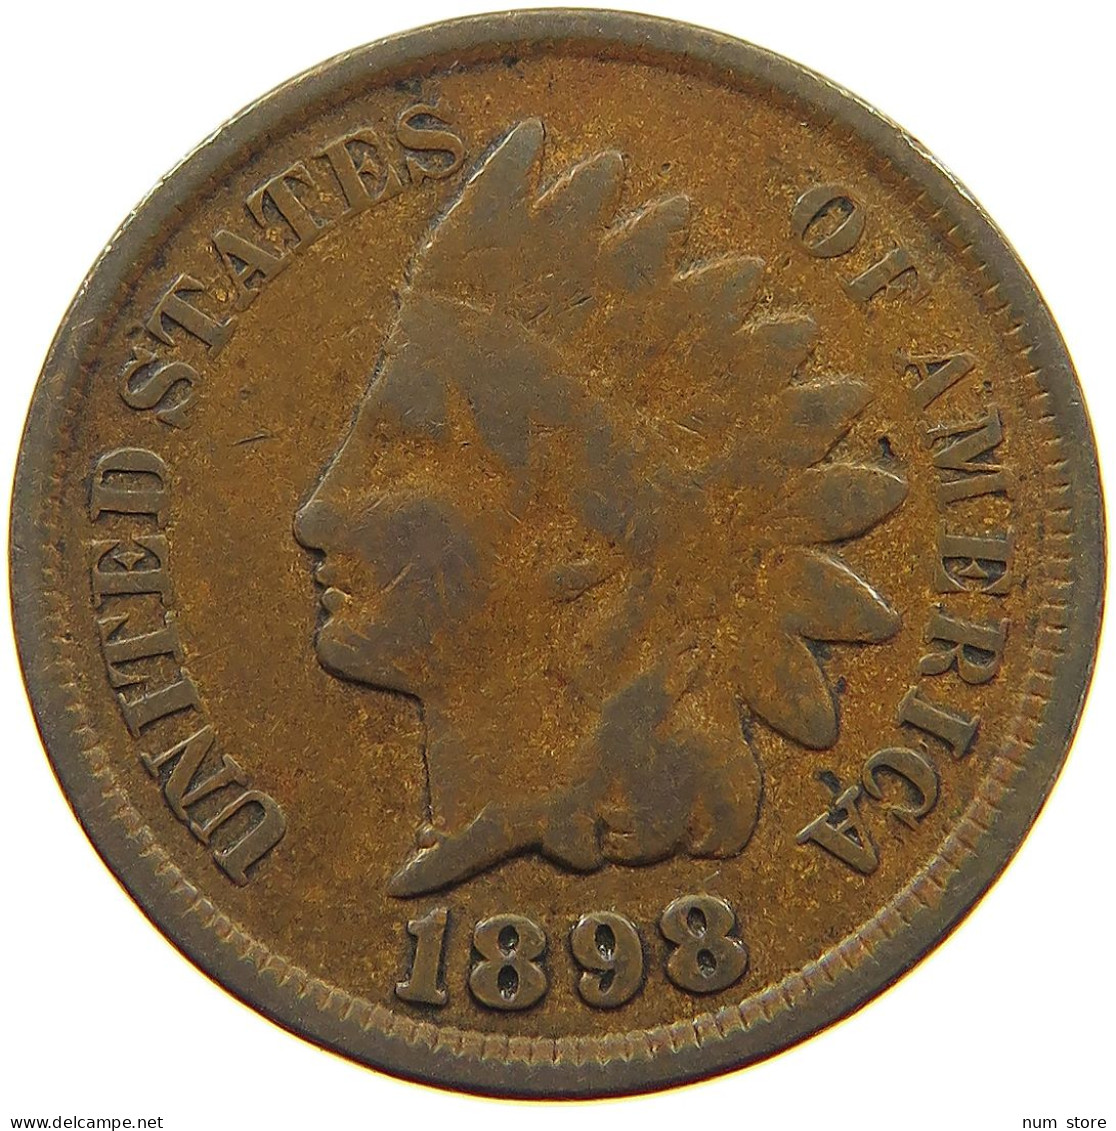 UNITED STATES OF AMERICA CENT 1898 INDIAN HEAD #s063 0381 - 1859-1909: Indian Head